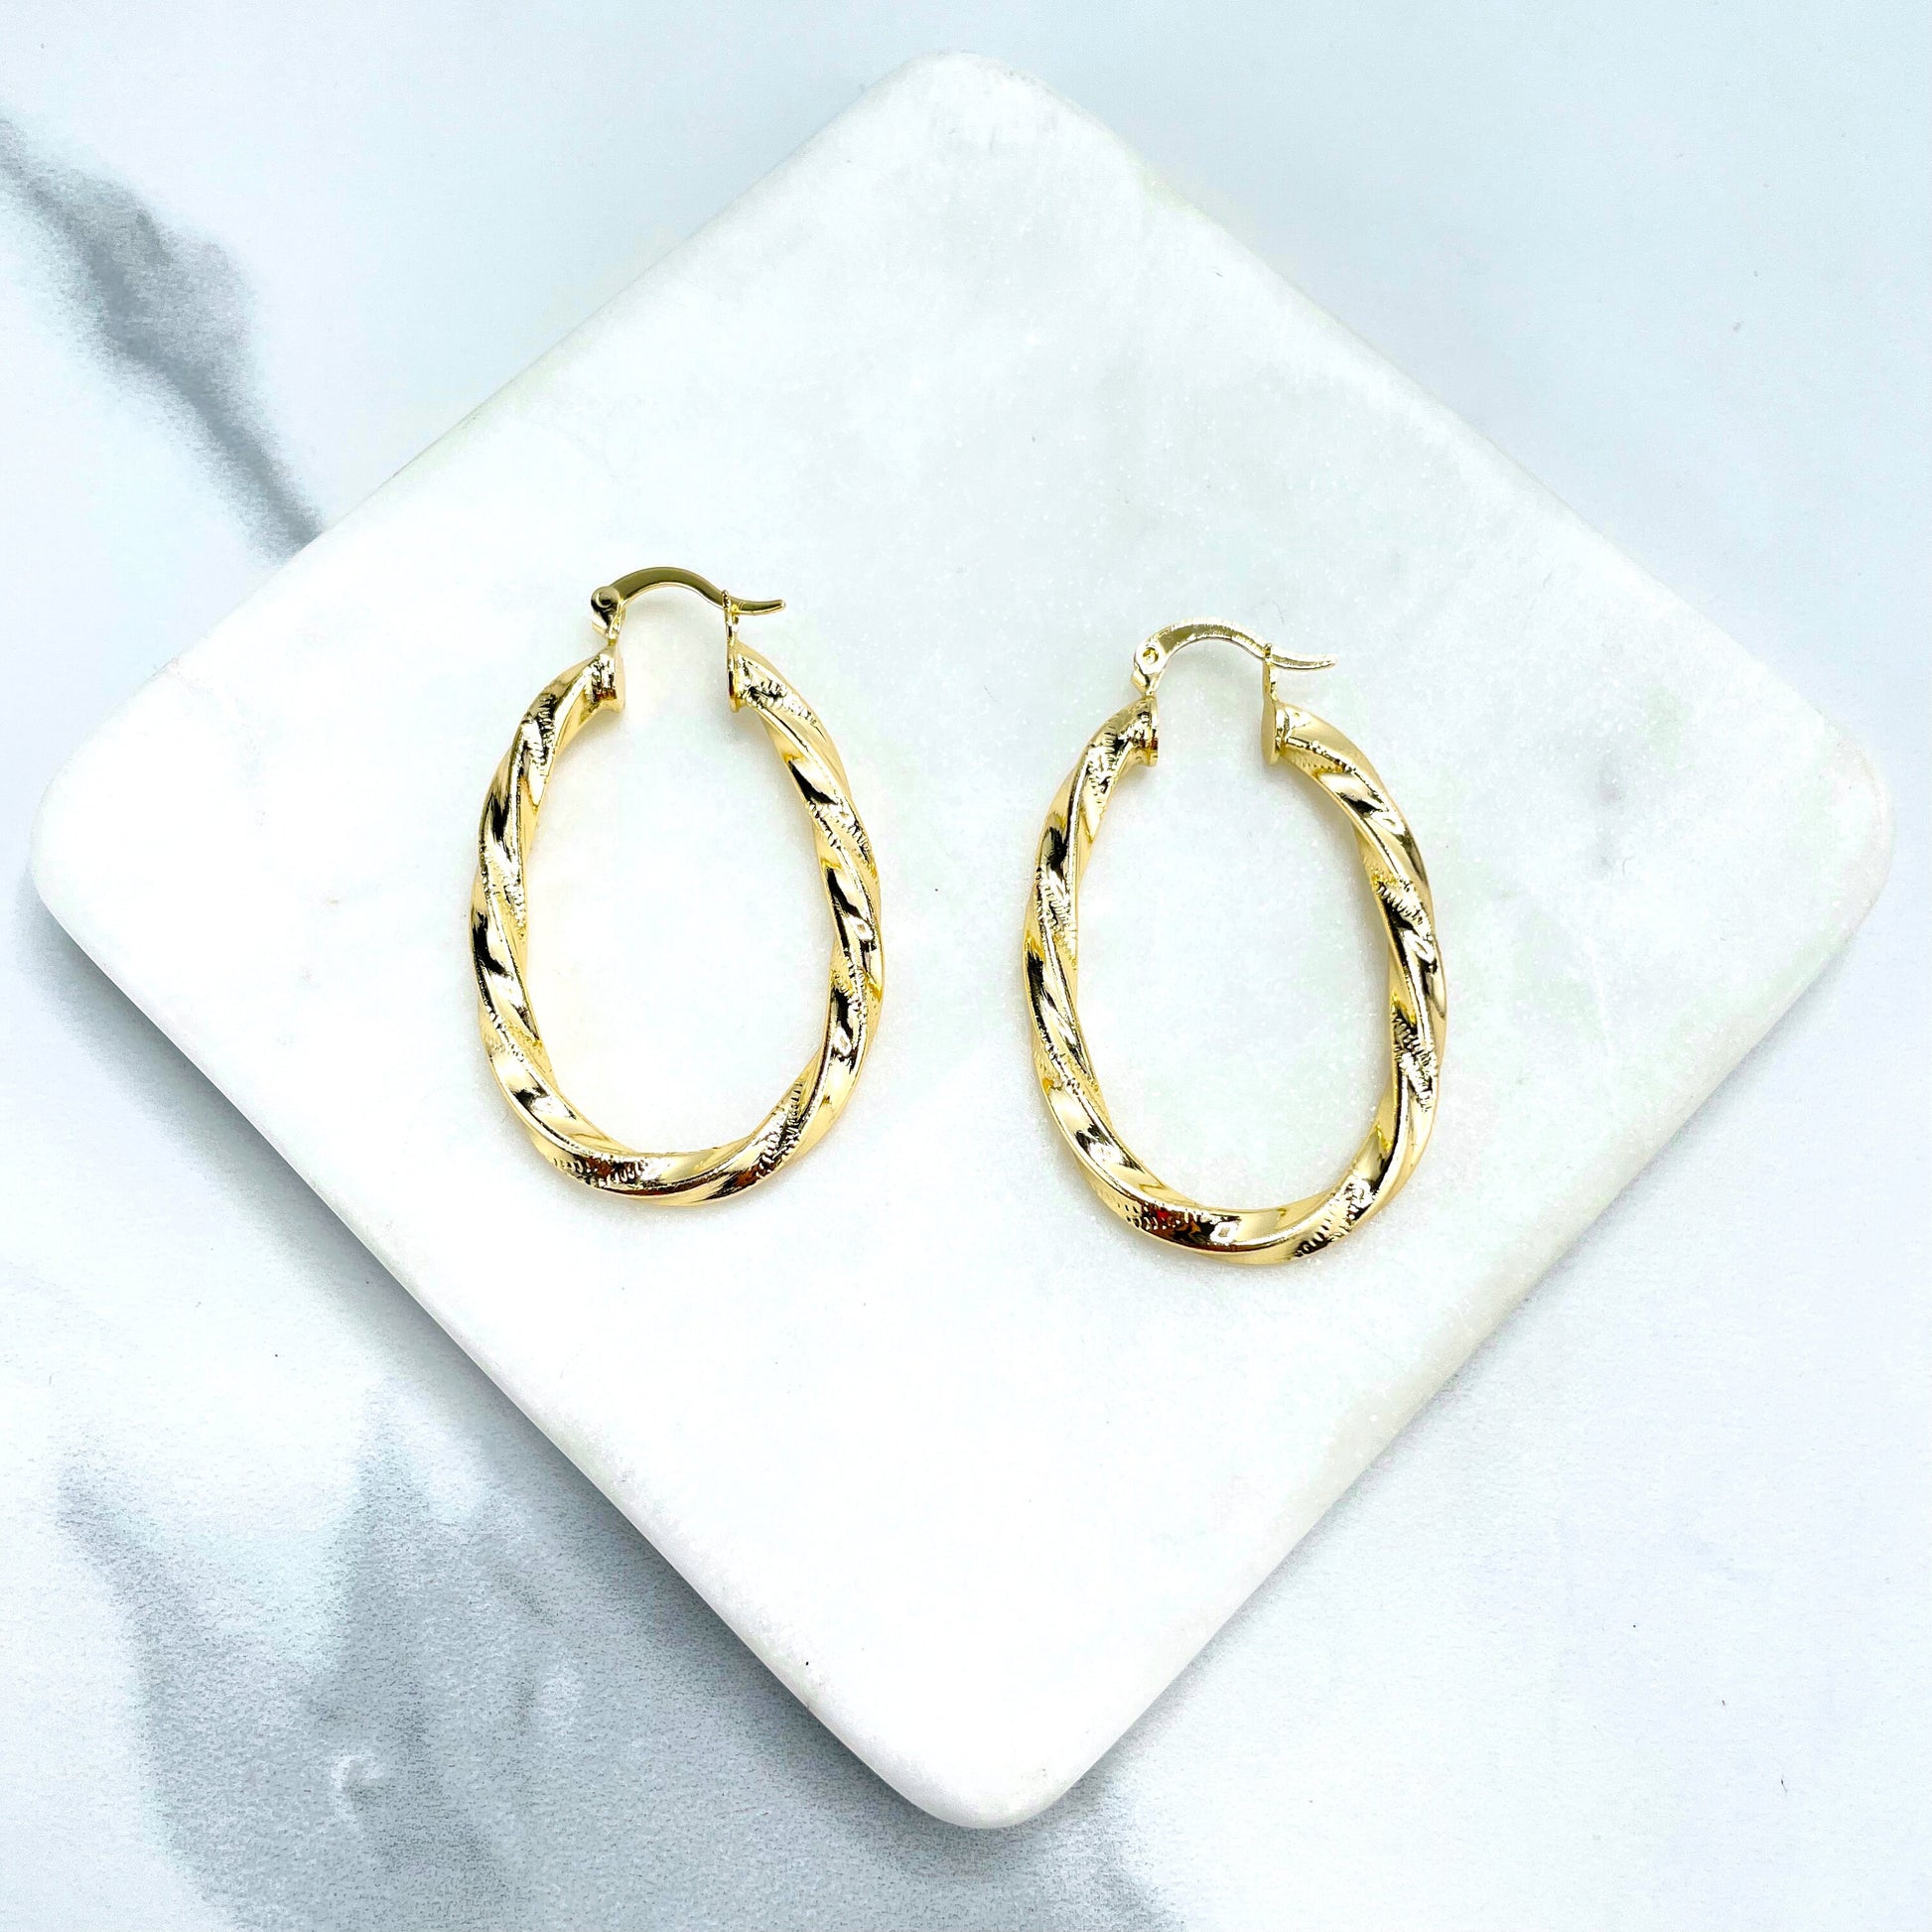 18k Gold Filled 28mm Twisted & Texturized Oval Design Hoops Earrings, Wholesale Jewelry Making Supplies